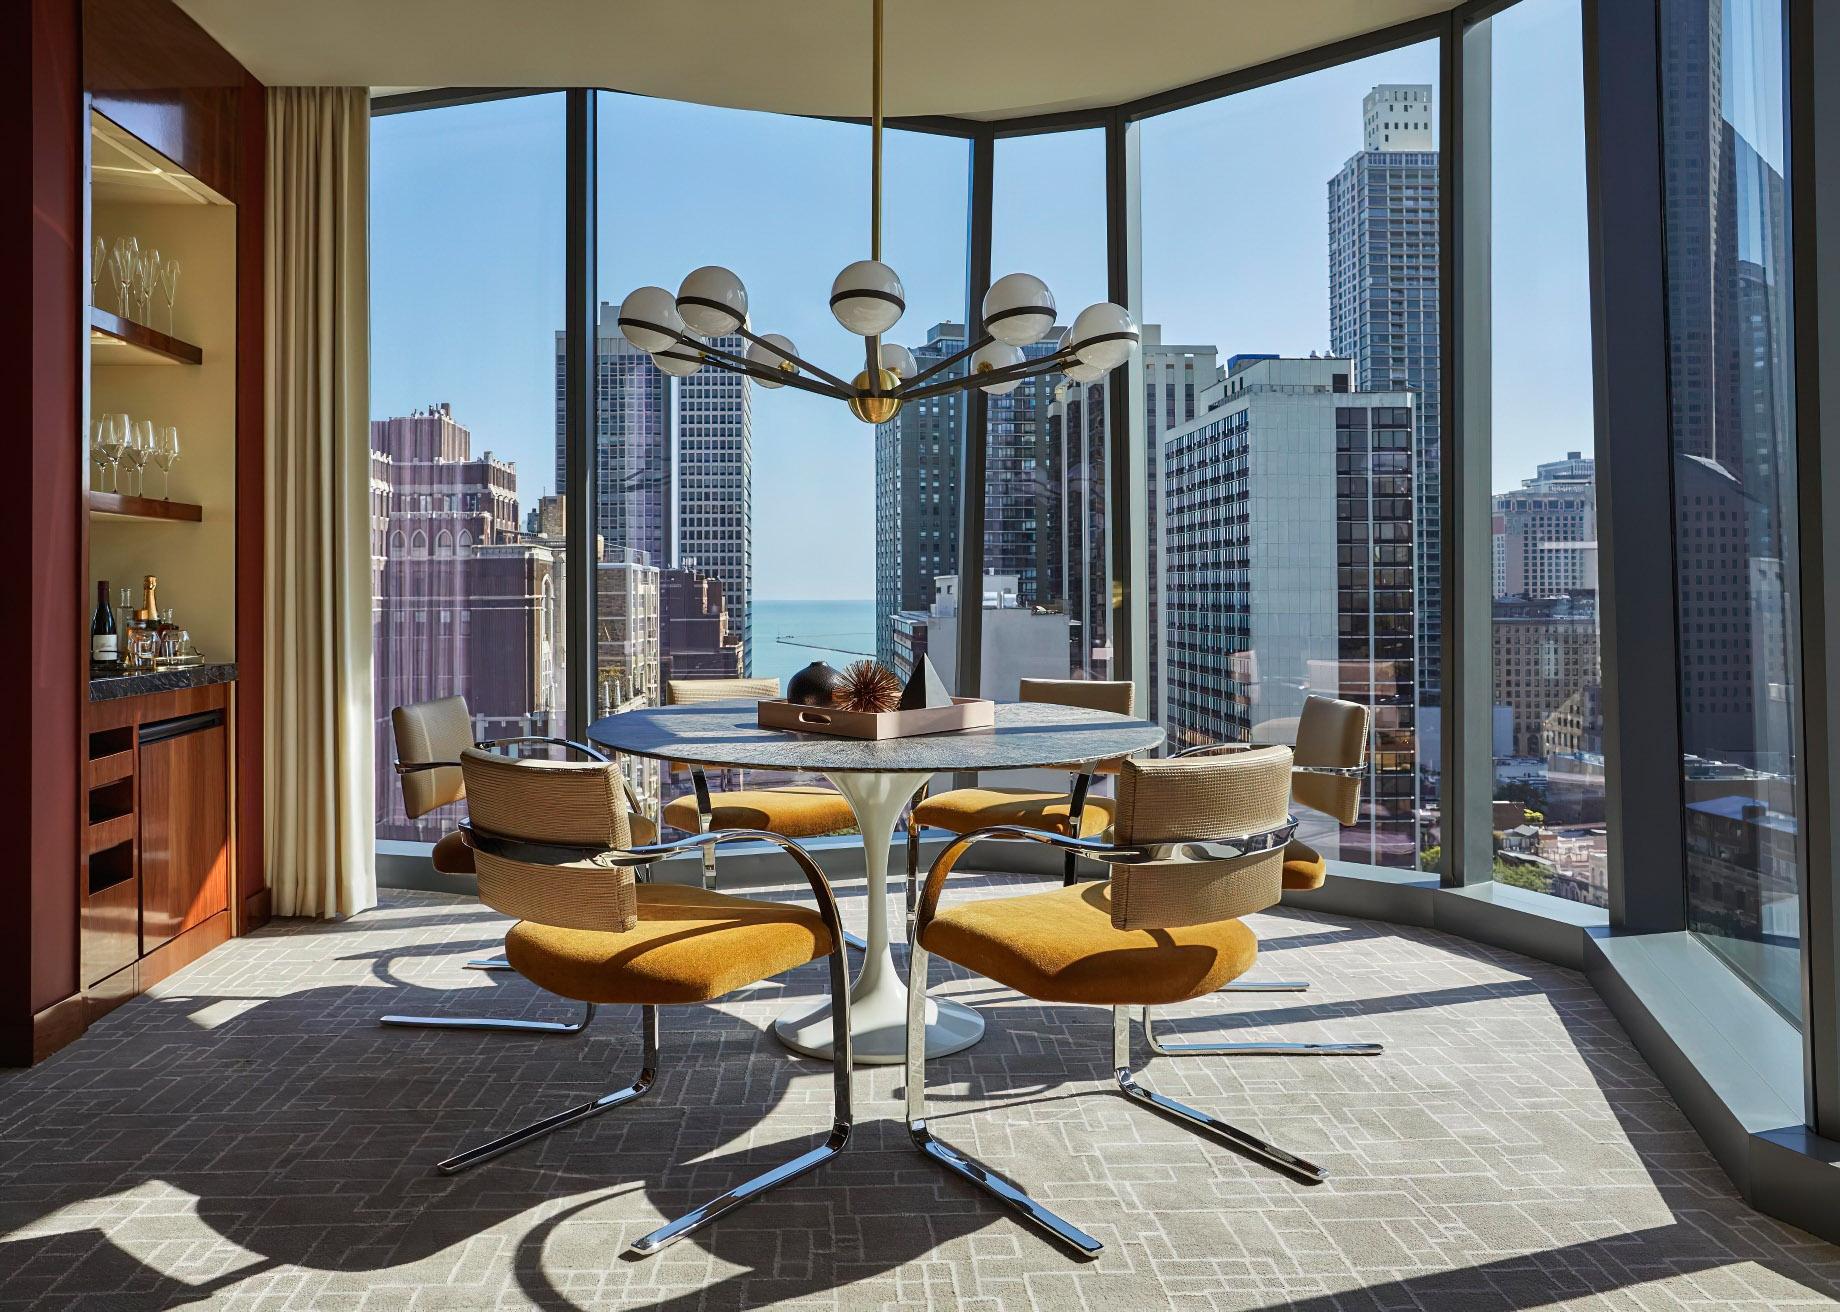 Viceroy Chicago Hotel – Chicago, IL, USA – Penthouse Suite Dining Room